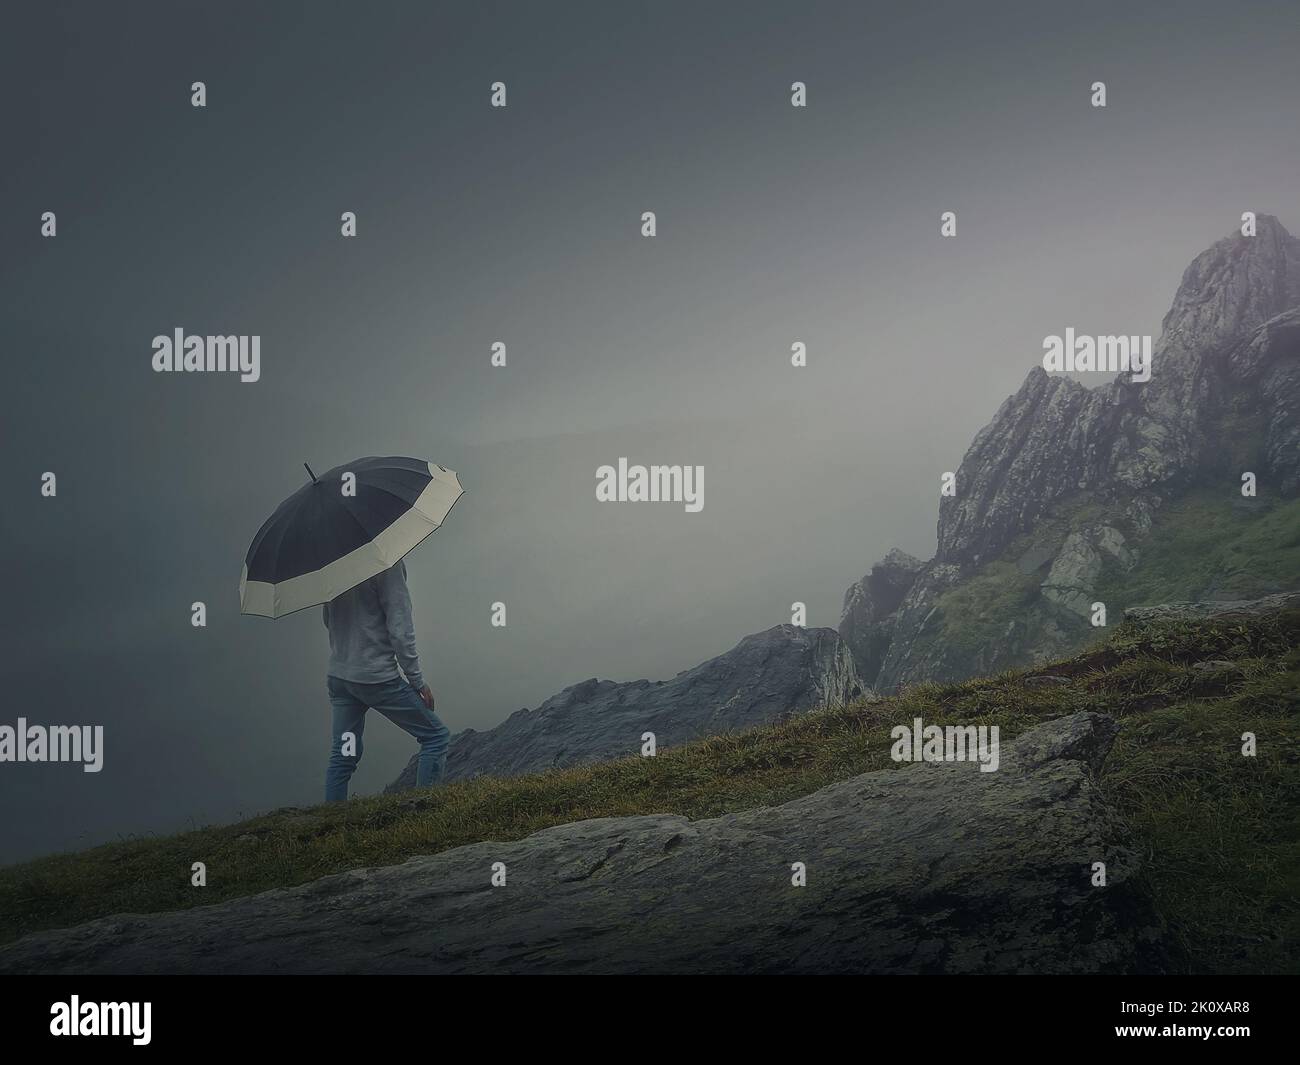 Rear view of a lonely man with umbrella stands on a rocky hill covered by haze. Moody and emotional scene with a lone stranger silhouette under rain Stock Photo